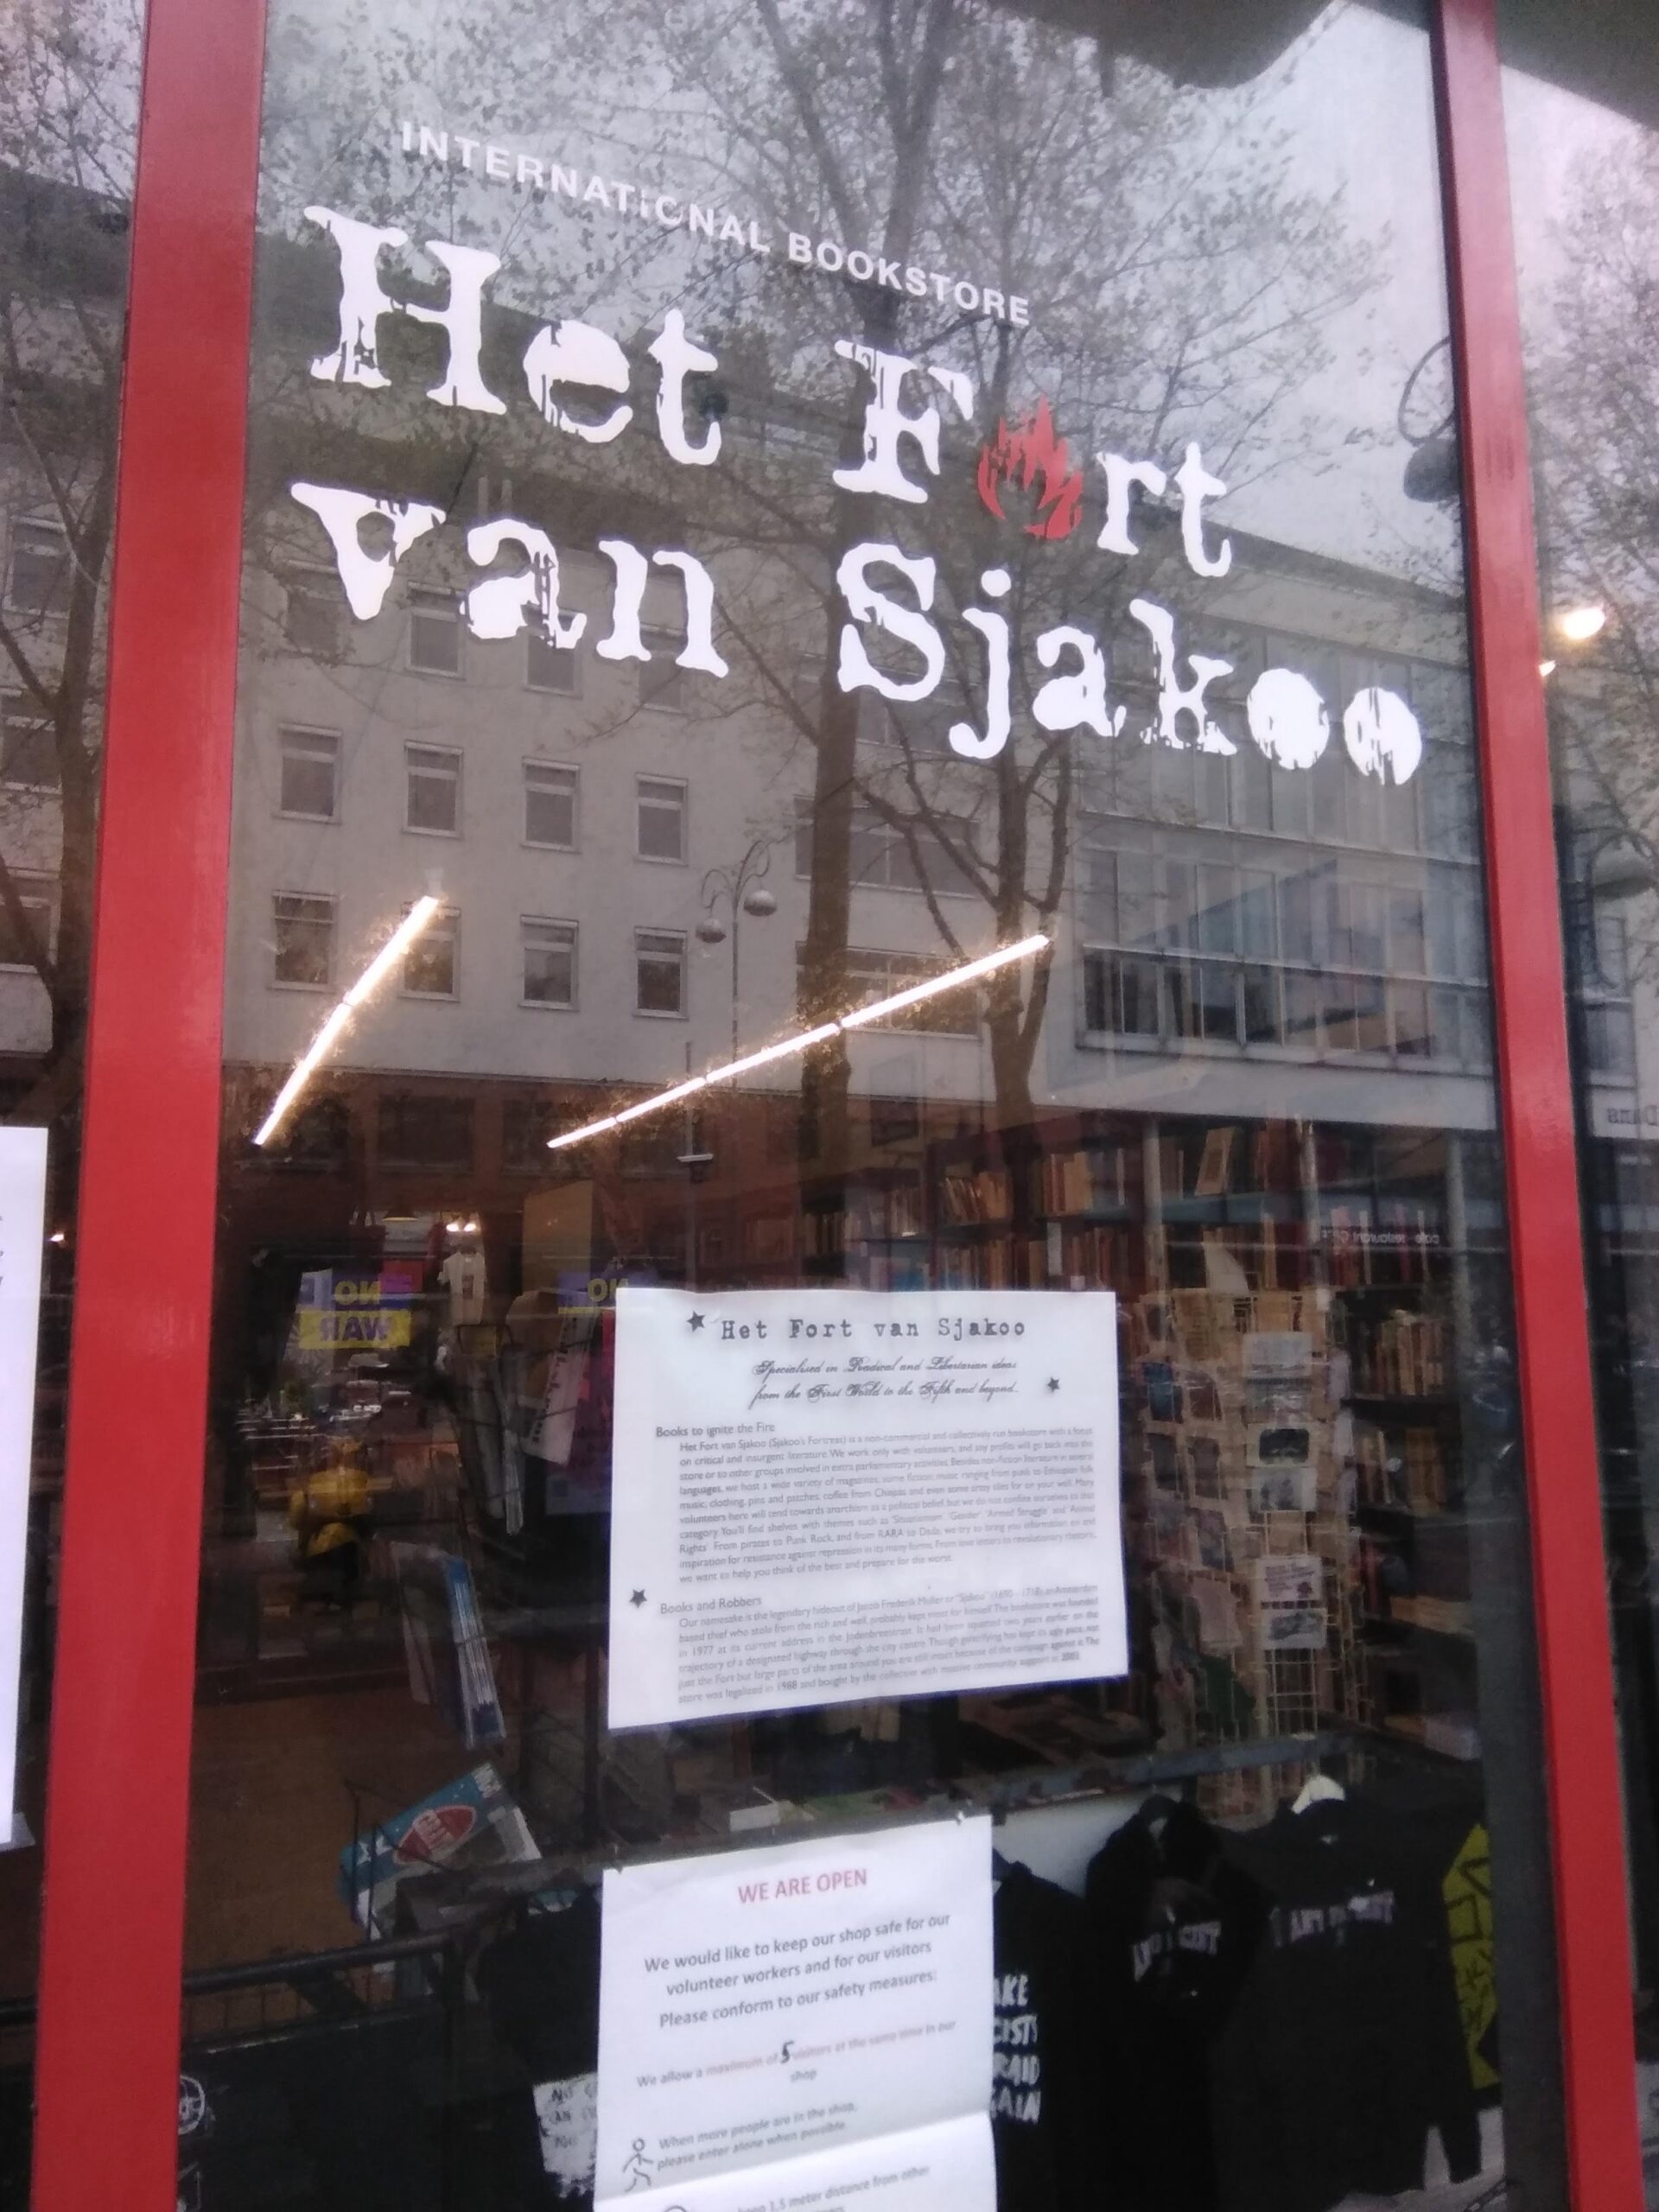 A picture of the outside to the anarchist bookshop 'Het Fort van Sjakoo' in Amsterdam. I bought 5 books about van der Lubbe there.